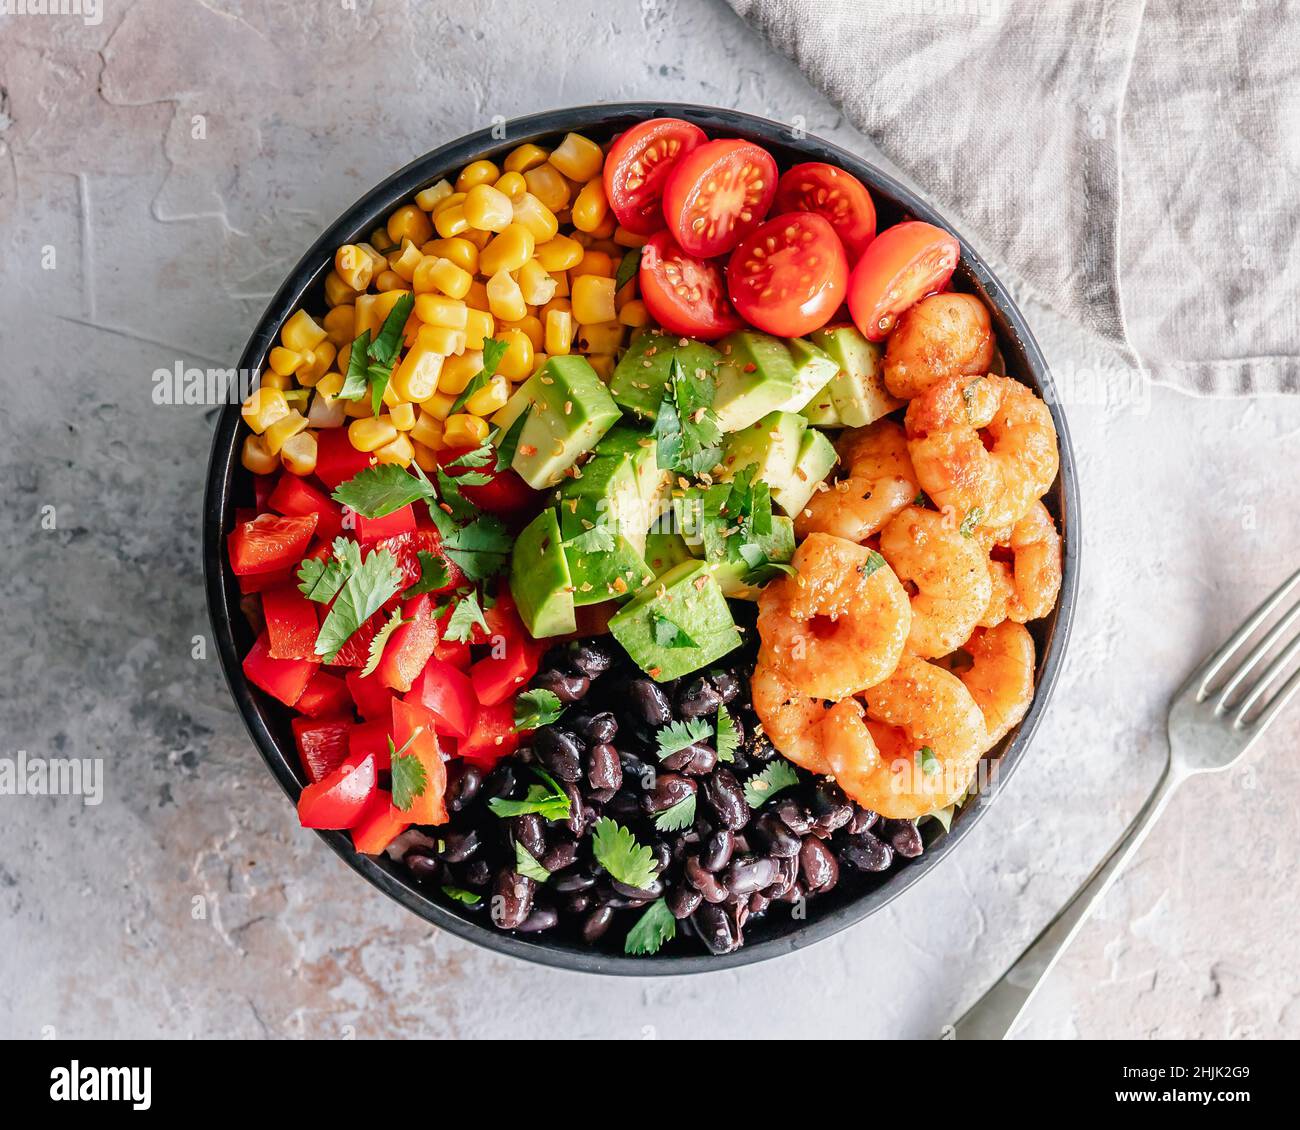 Overhead view of a Mexican shrimp salad with sweetcorn, red peppers, black beans, tomatoes, avocado and coriander Stock Photo